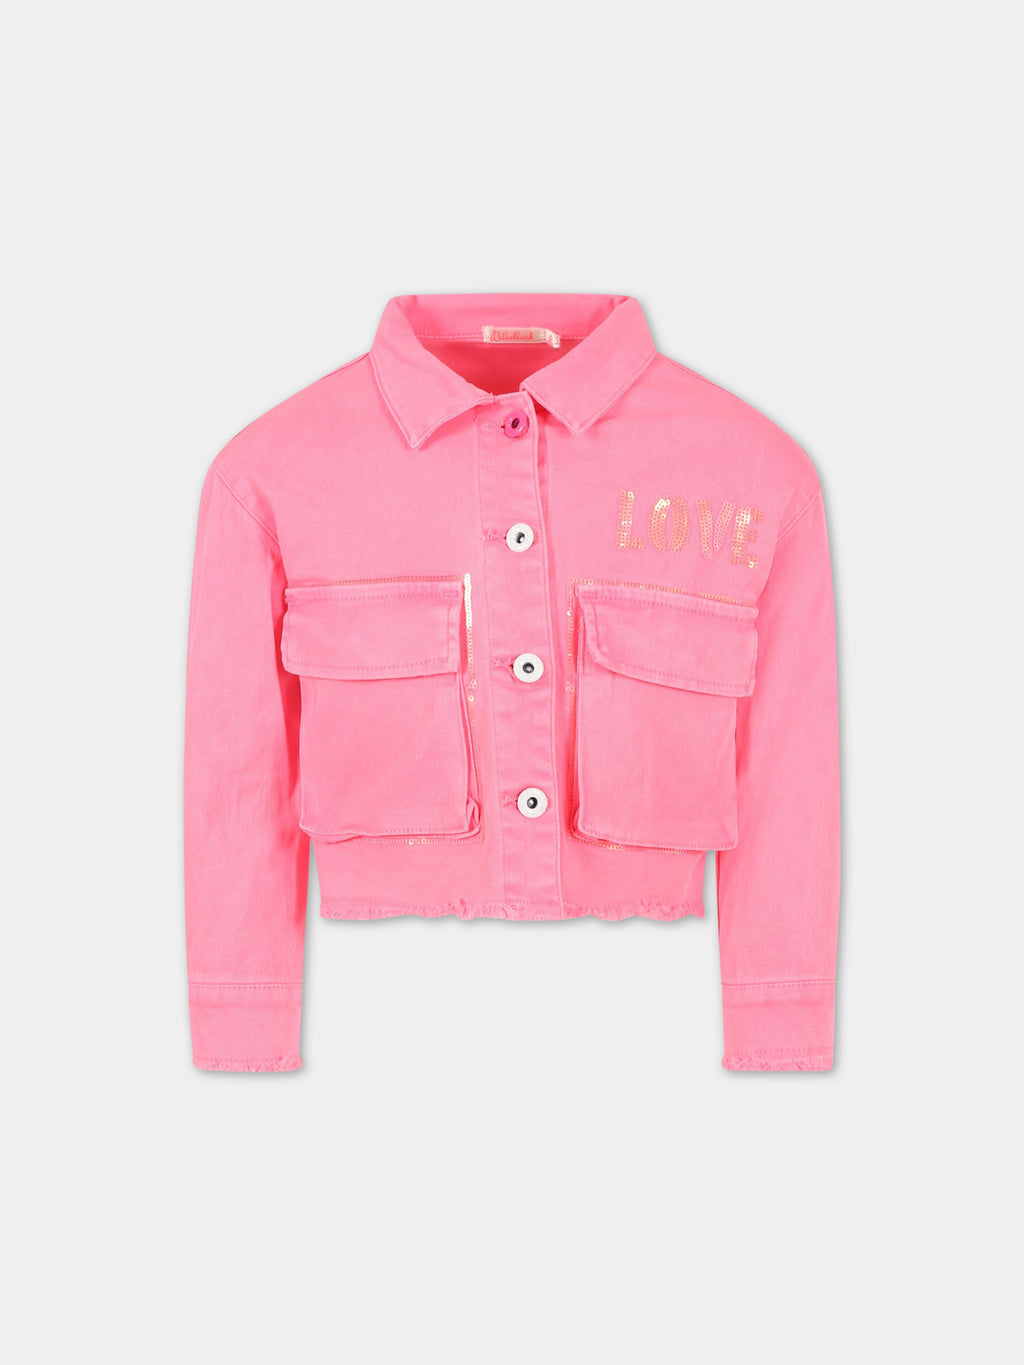 Pink jacket for girl with  Love writing